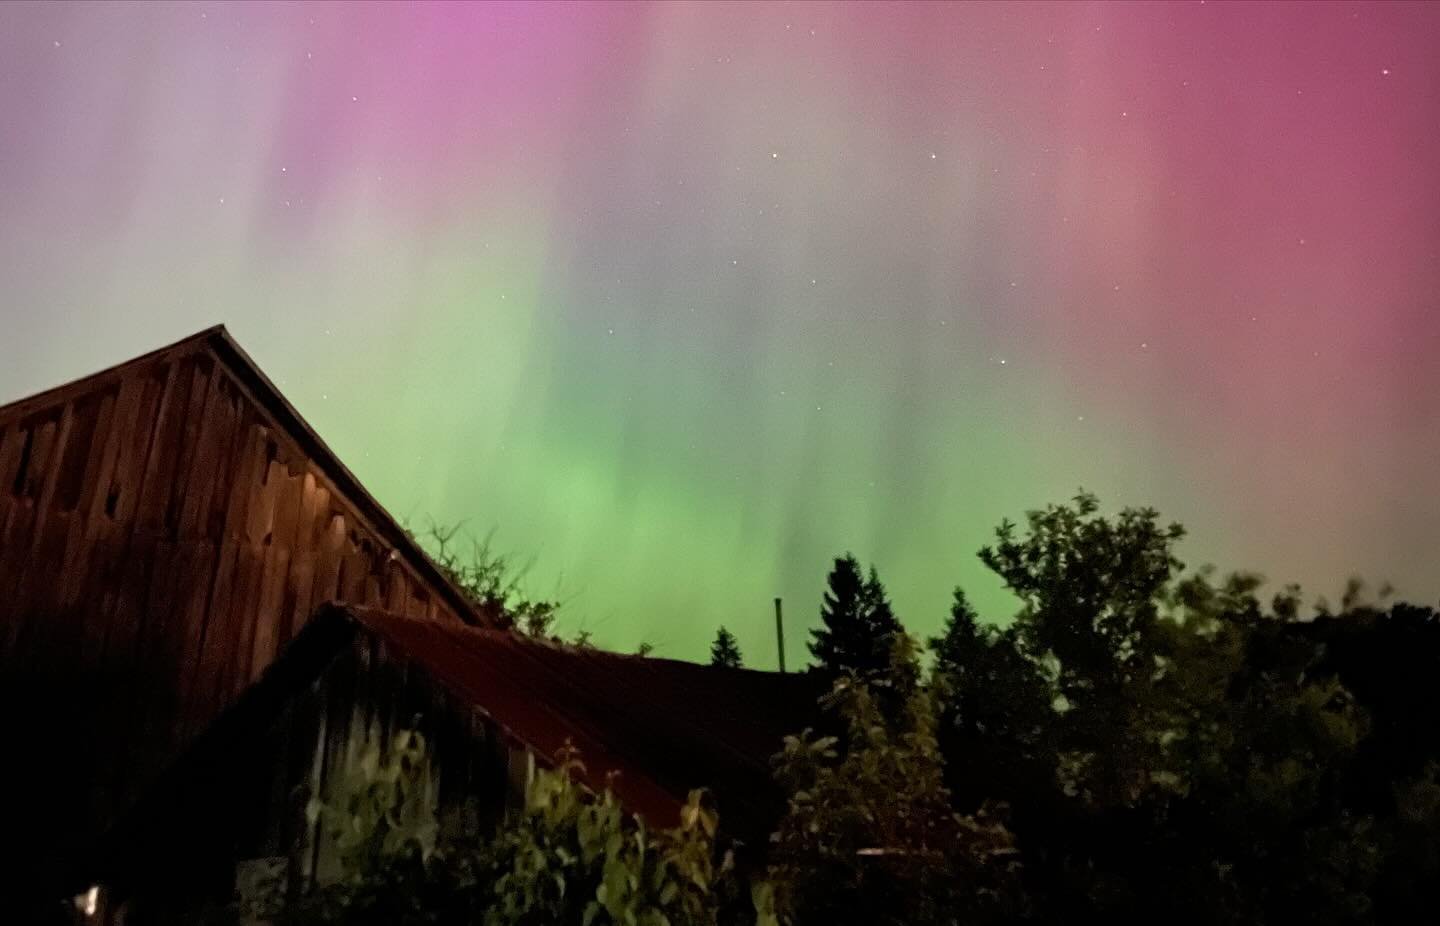 Incredible night last night on the farm! That light show was just mind blowing! I can&rsquo;t wait to see what tonight is going to bring us!
#auroraborealis